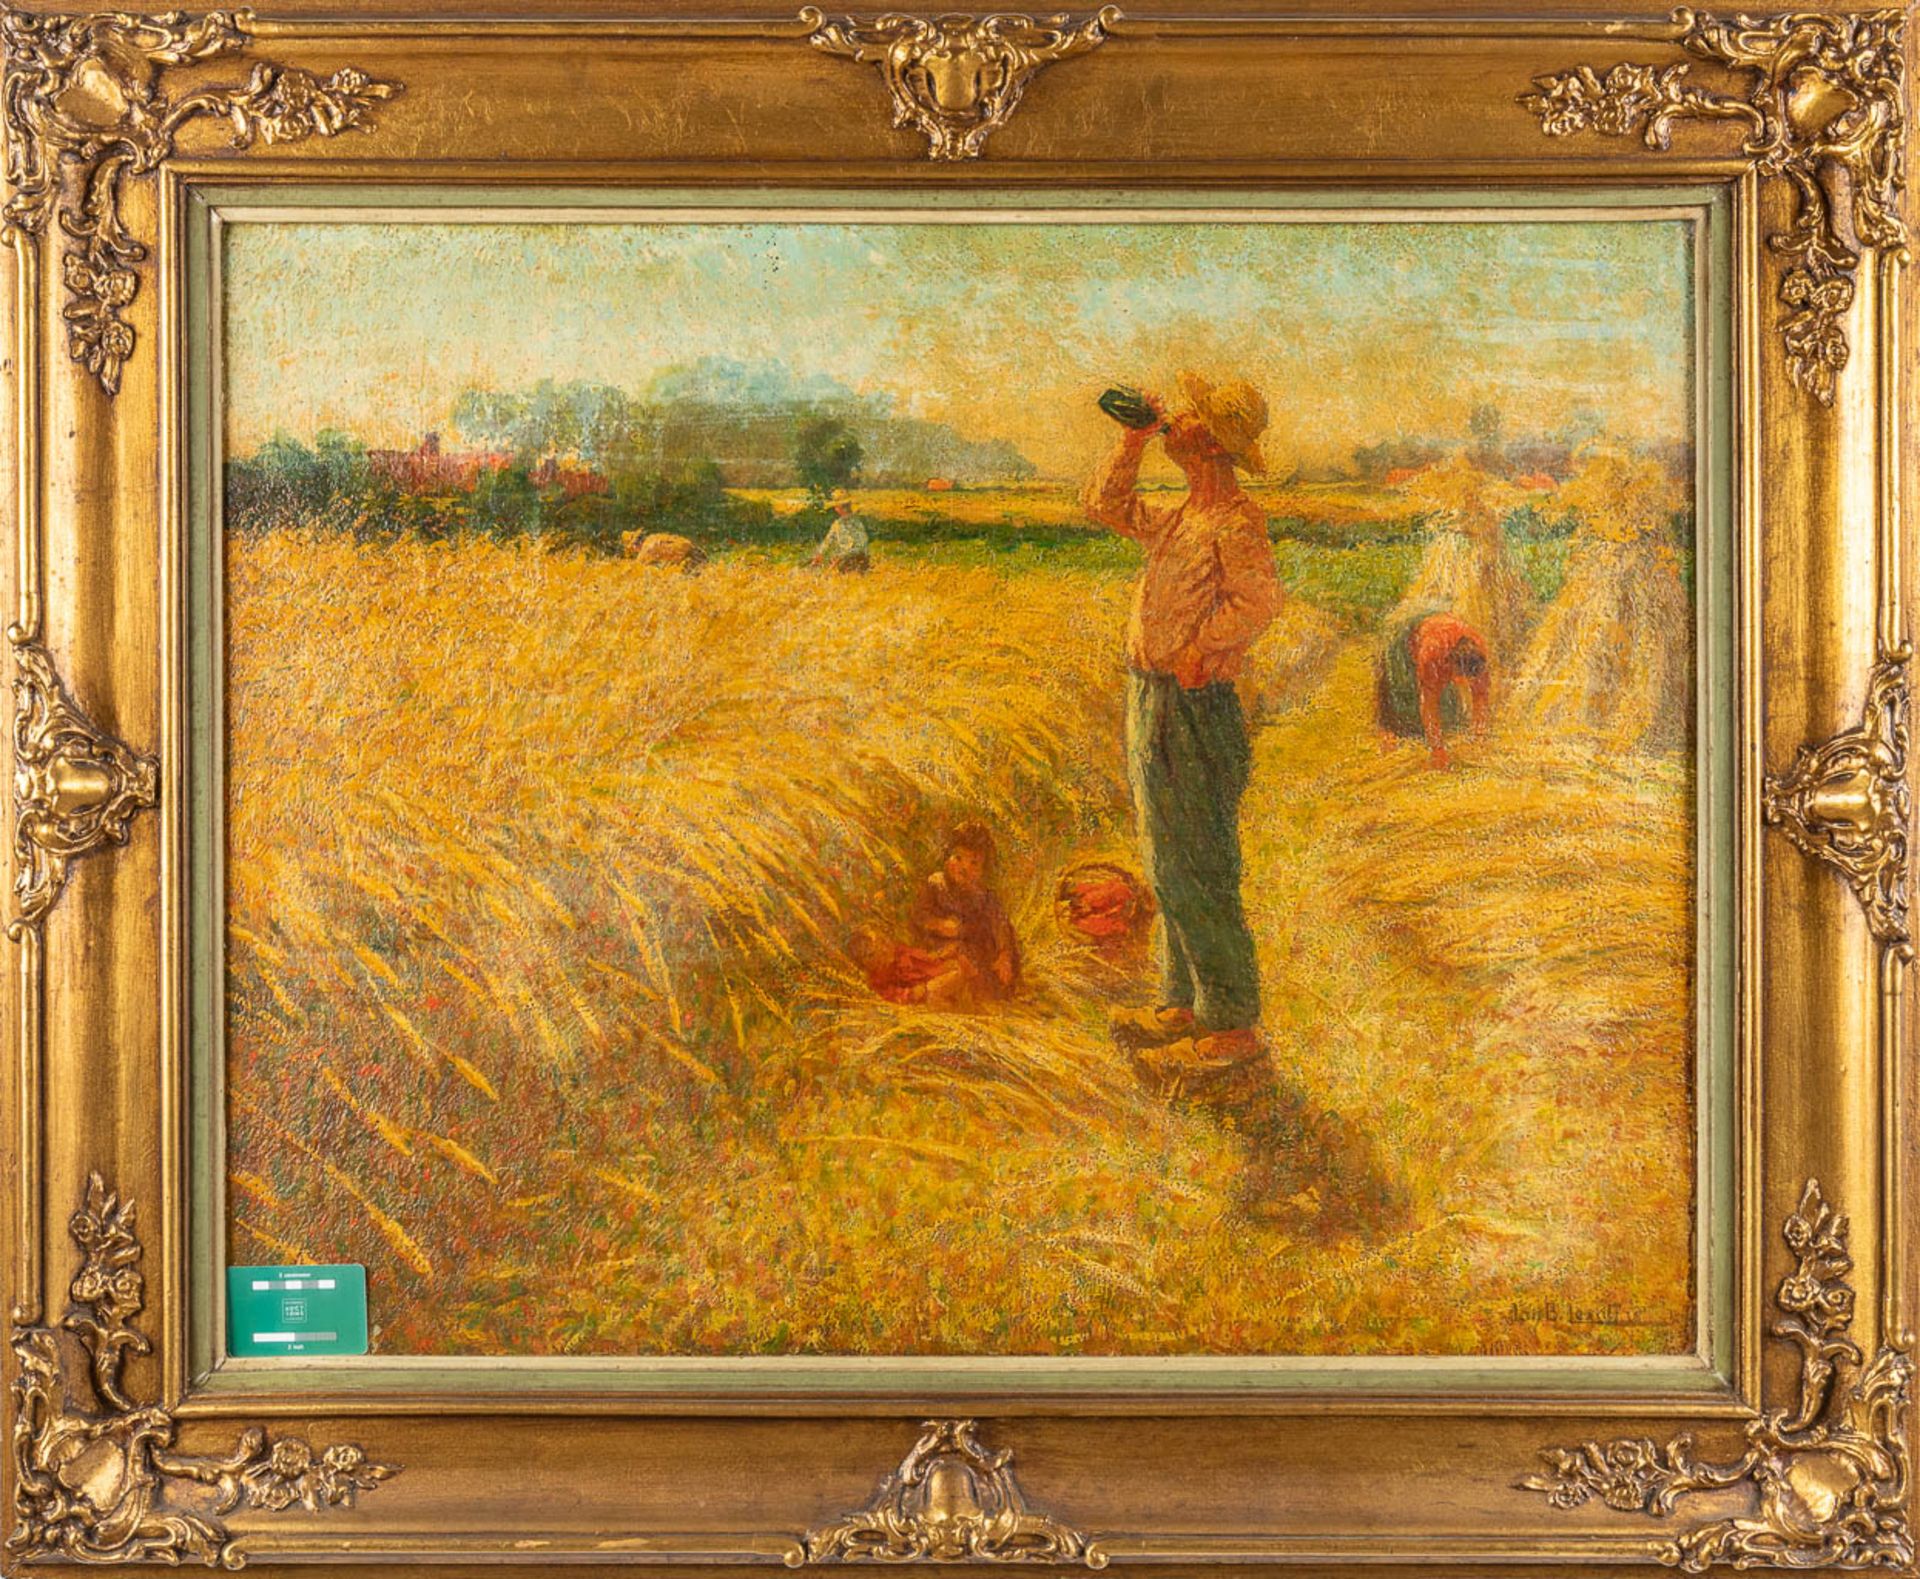 Jan-Baptist LESAFFRE (1864-1926) 'Farmer and family in the field' oil on panel. (W:90 x H:70 cm) - Image 2 of 10